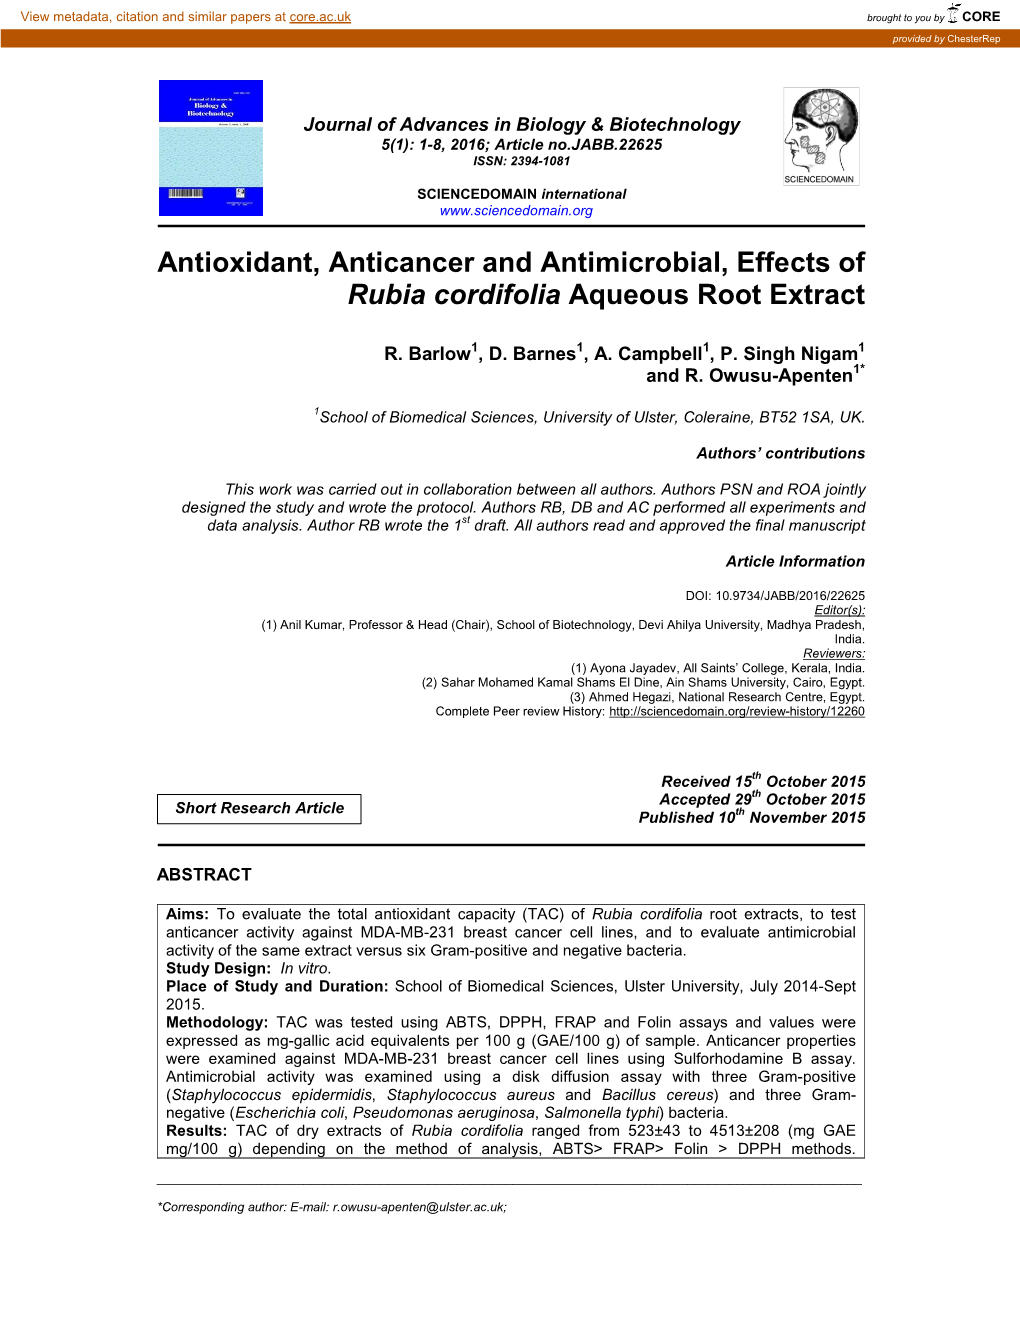 Antioxidant, Anticancer and Antimicrobial, Effects of Rubia Cordifolia Aqueous Root Extract